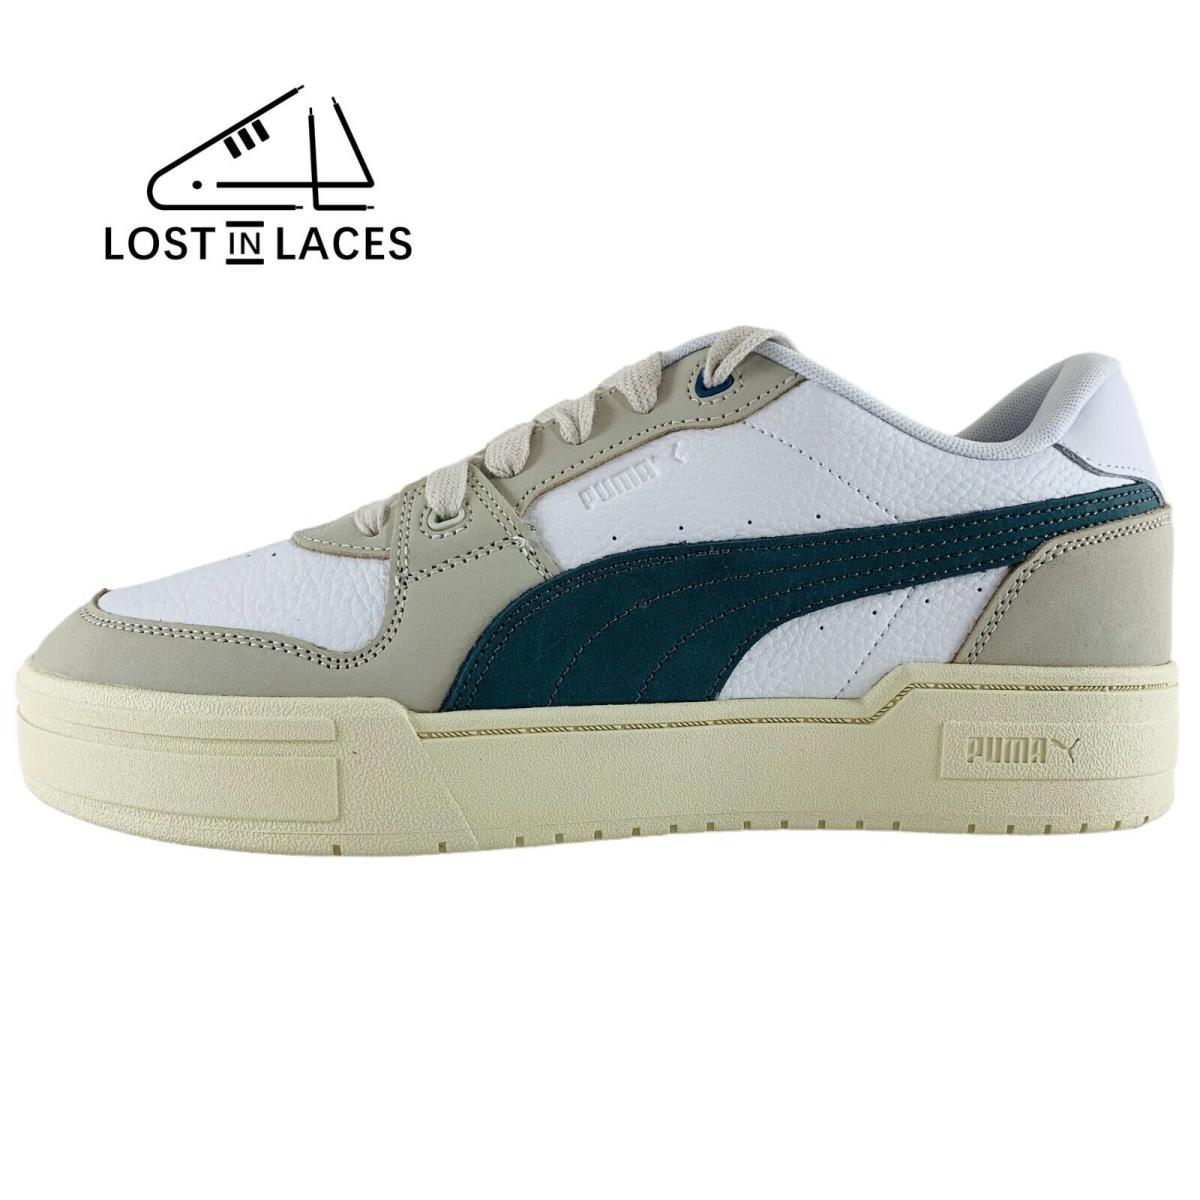 Puma CA Pro Lux White Green Grey Sneakers Shoes 387488-02 Men`s Sizes